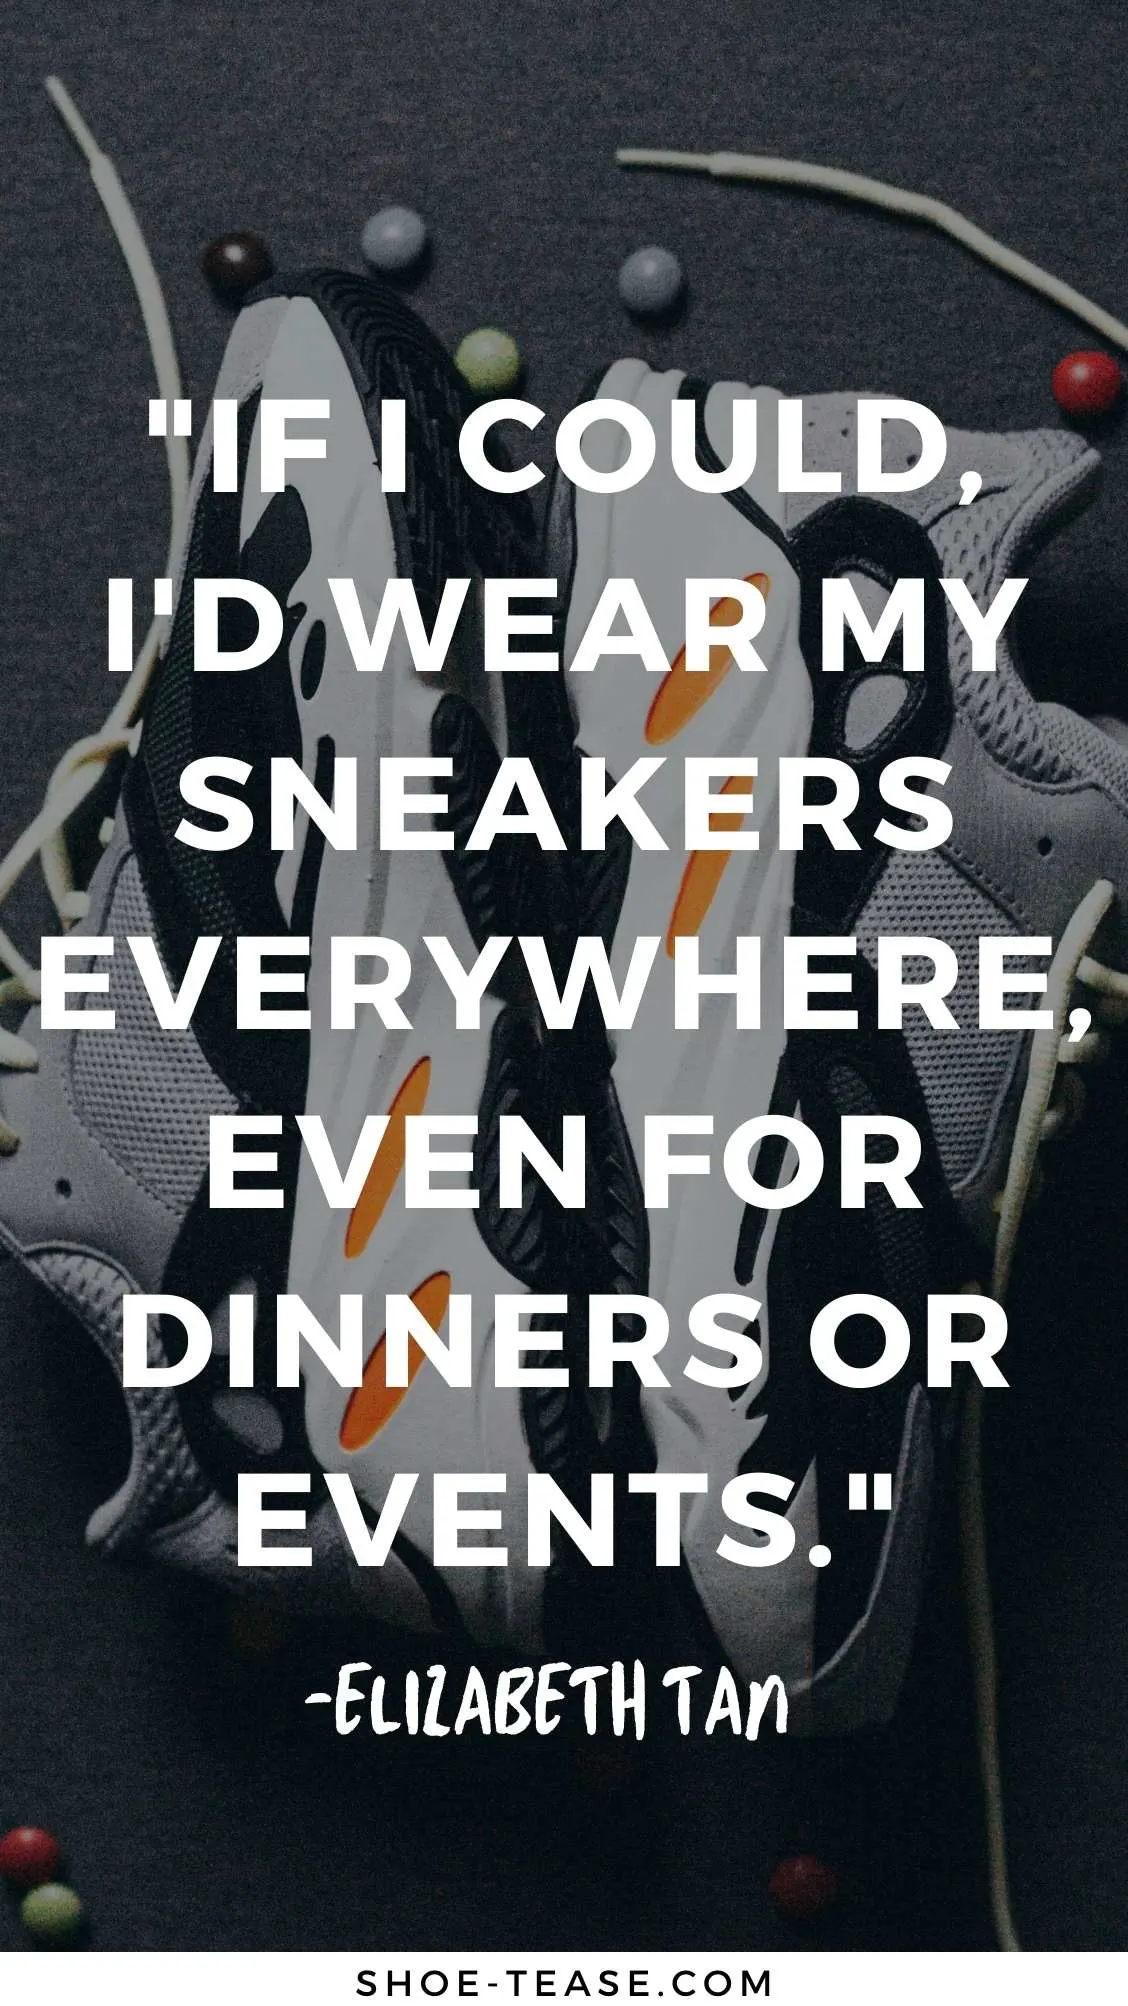 Sneakers Quote reading if I could, I'd wear my sneakers everywhere even for dinners or events by Elizabeth Tan over image of sneakers.